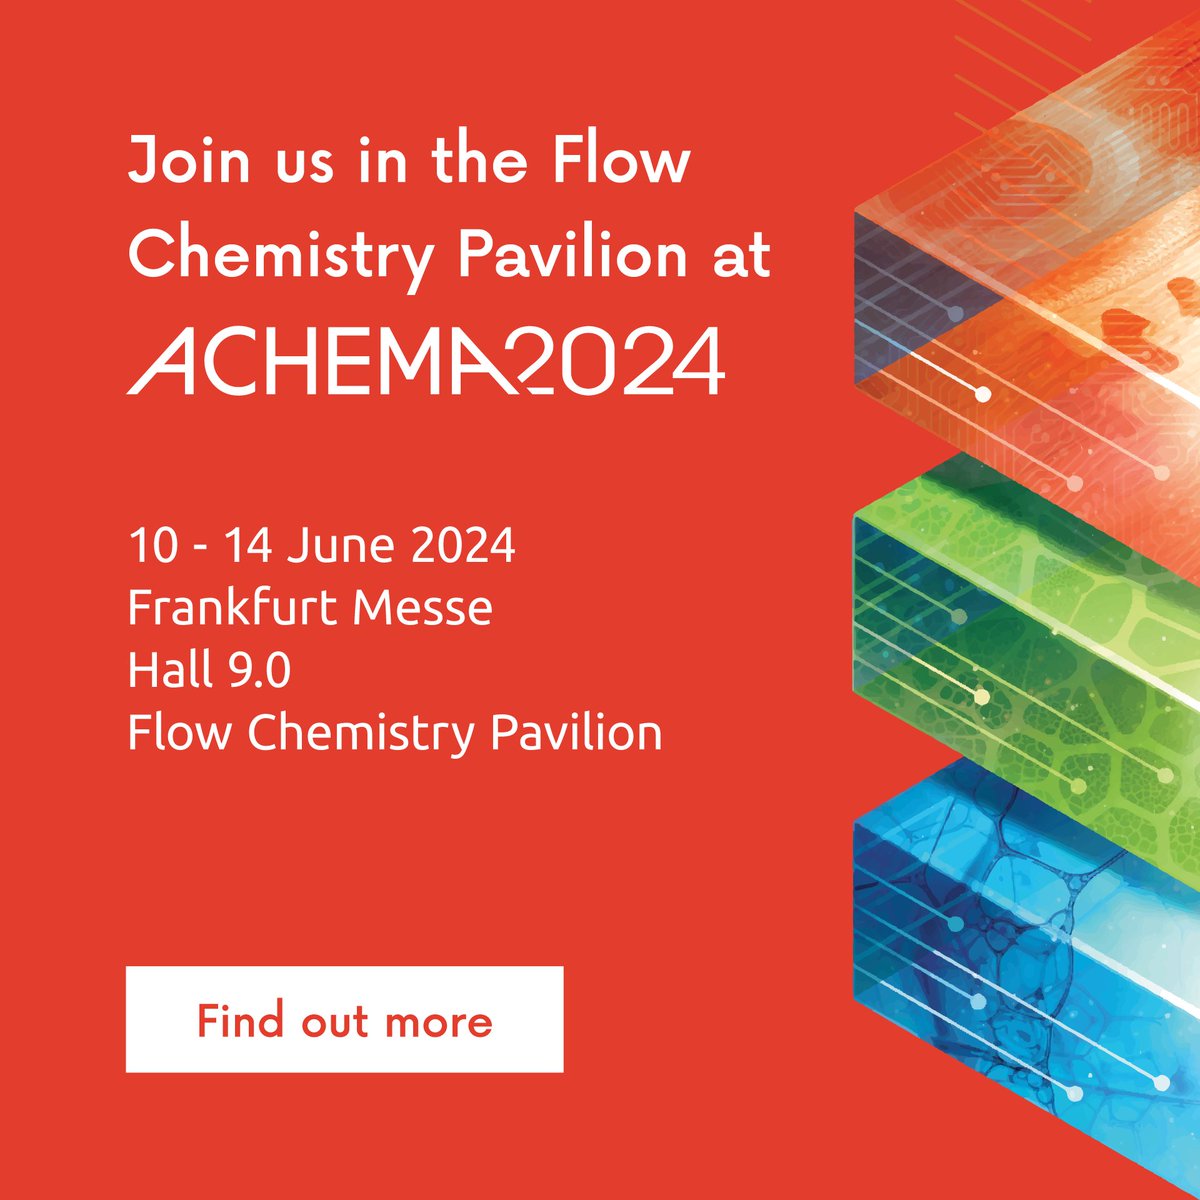 Exciting news at Syrris as we're gearing up to attend @ACHEMAworldwide from June 10th to 14th. Stay tuned for updates on our booth, presentations, and more! Have you got your ticket yet? #FlowChemistry #ACHEMA #ChemicalEngineering #Innovation